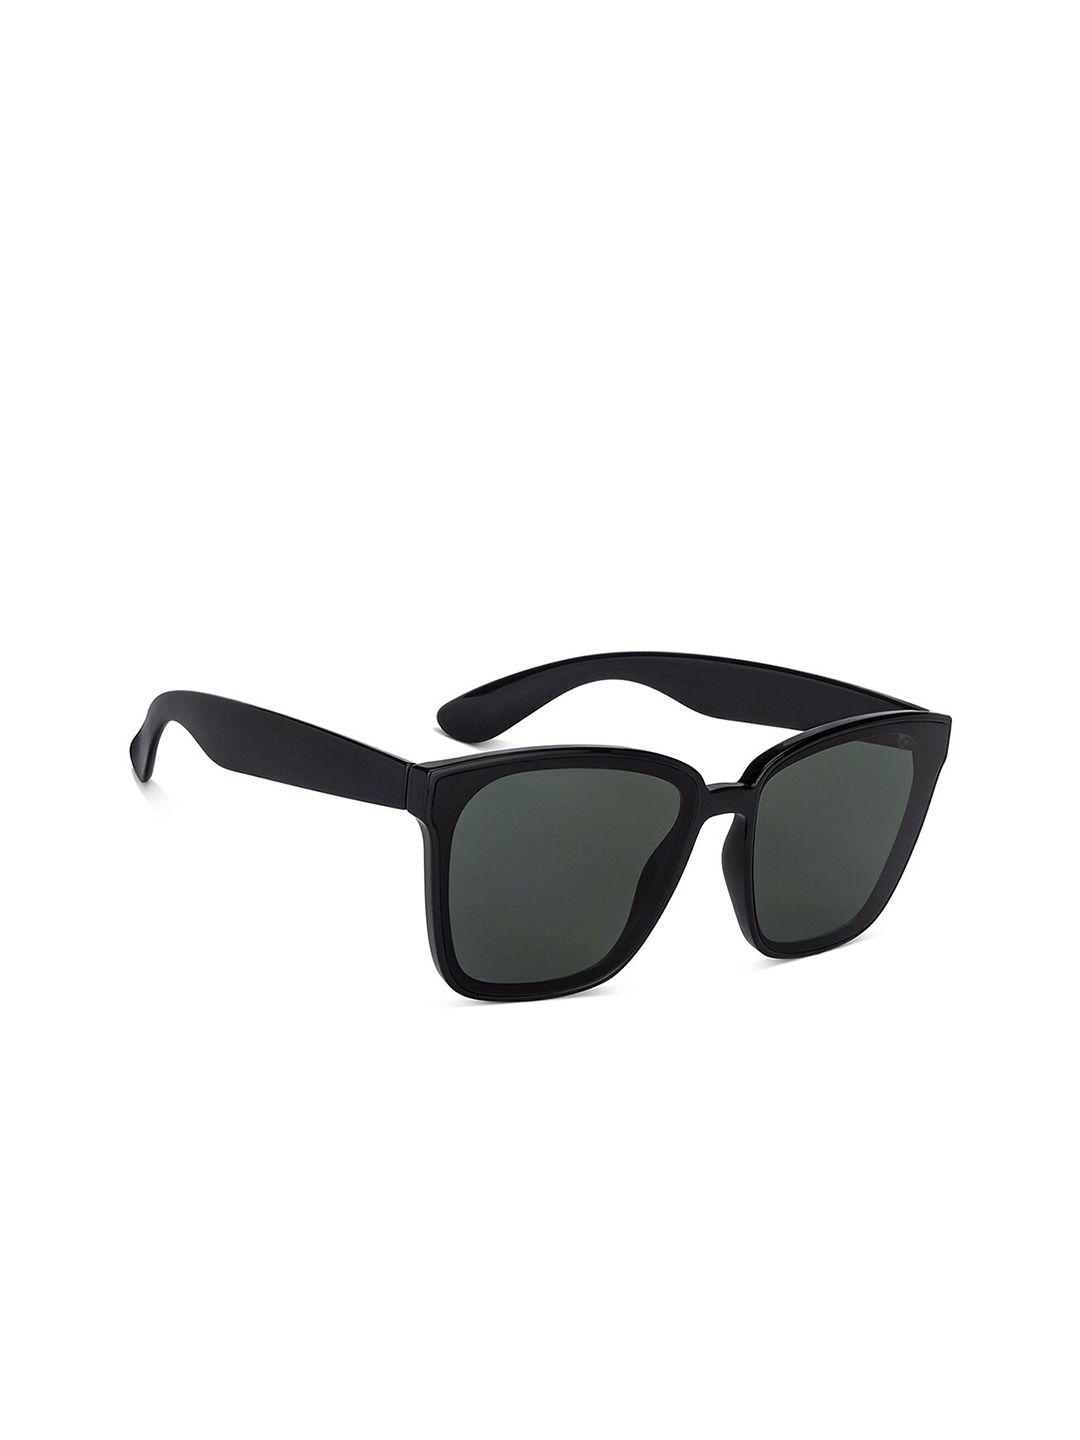 vincent chase wayfarer sunglasses with uv protected lens 151519